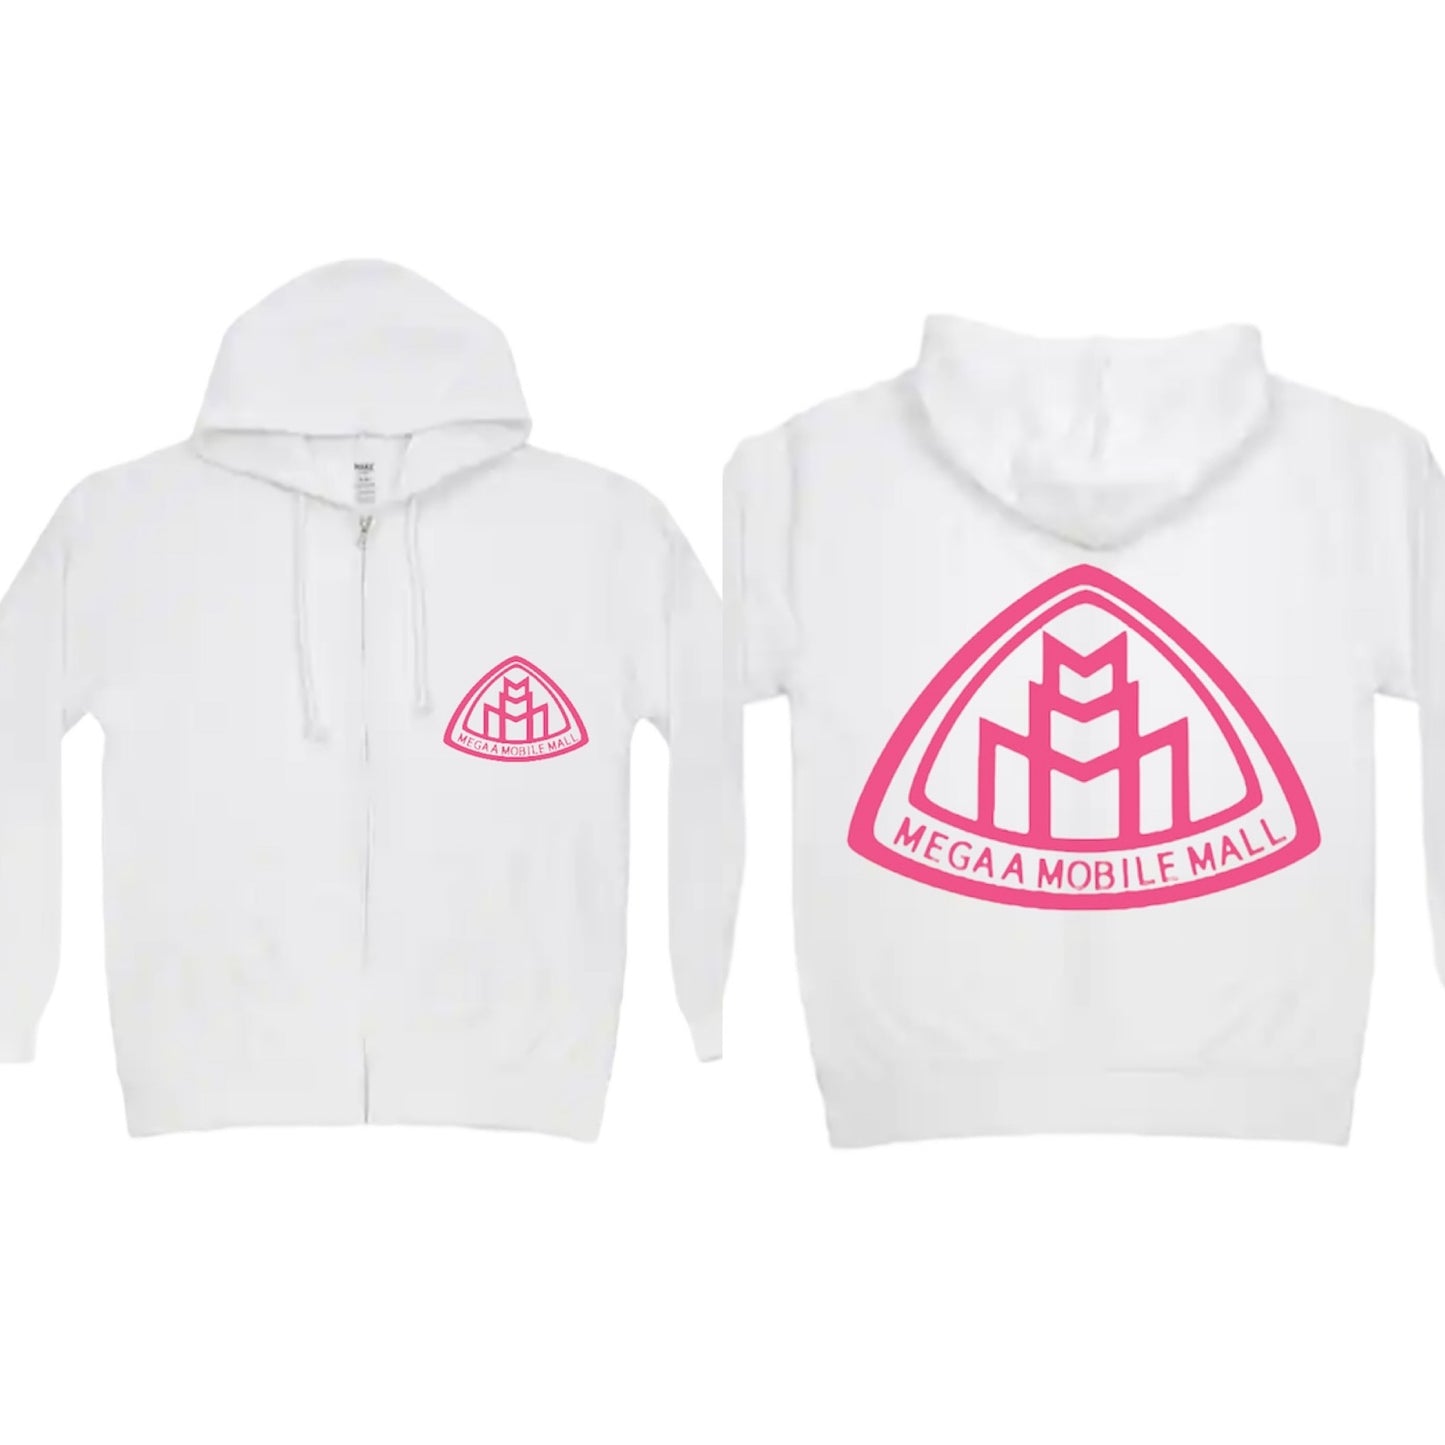 megaamobilemall white zip up hoodie with pink logo